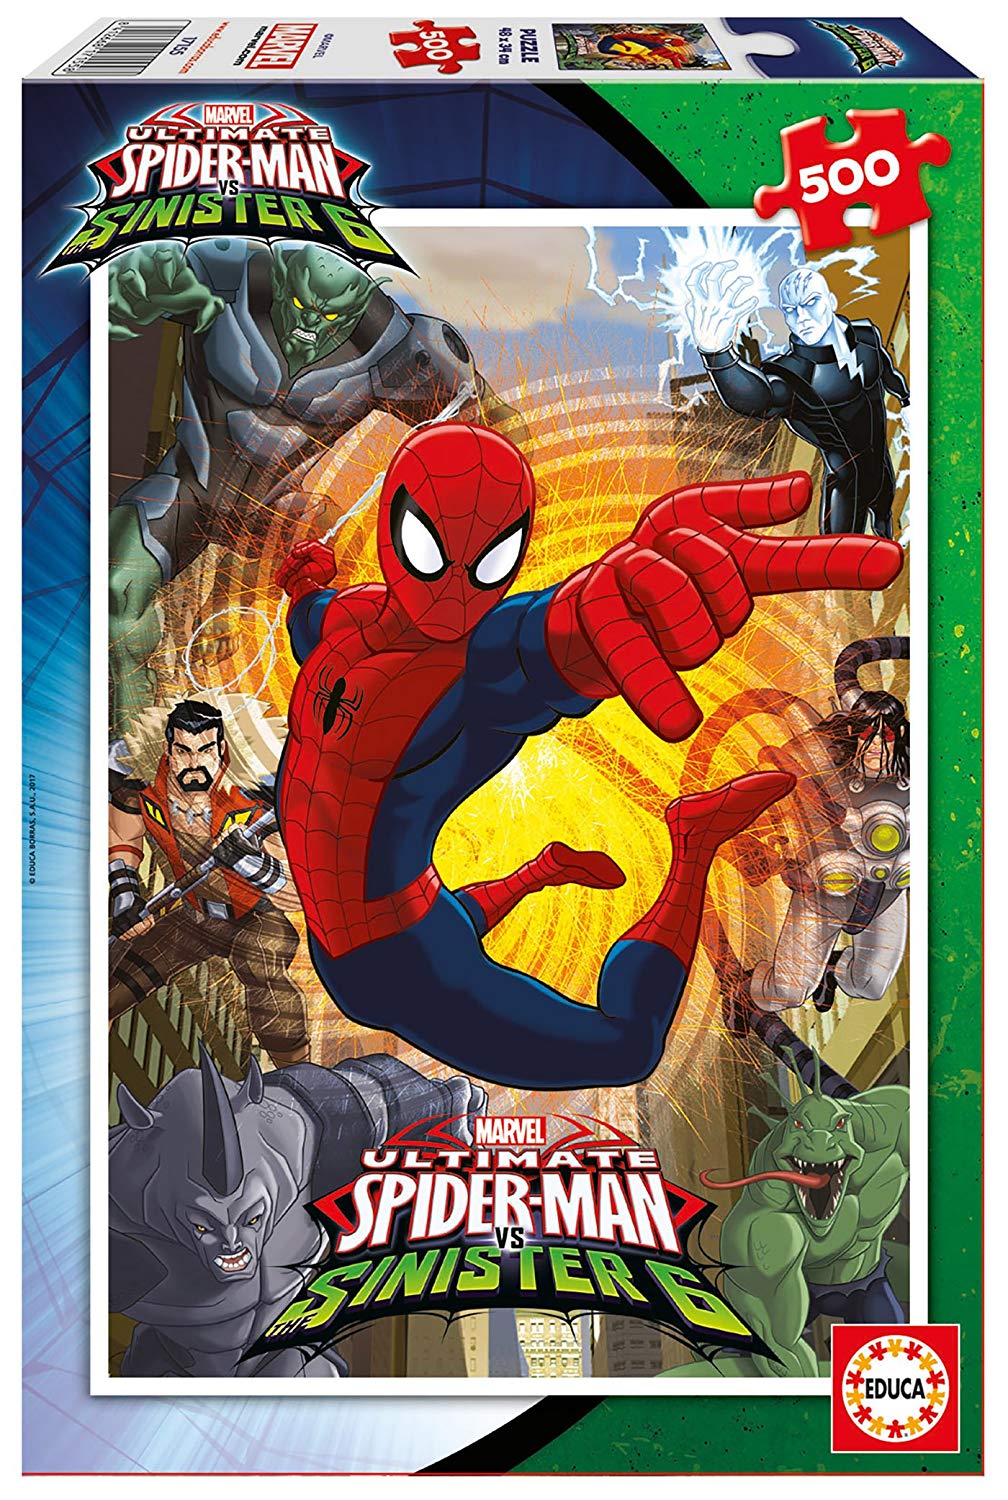 Educa 17155.0 – 500 Piece Jigsaw Puzzle Ultimate Spider-Man Vs The Sinister